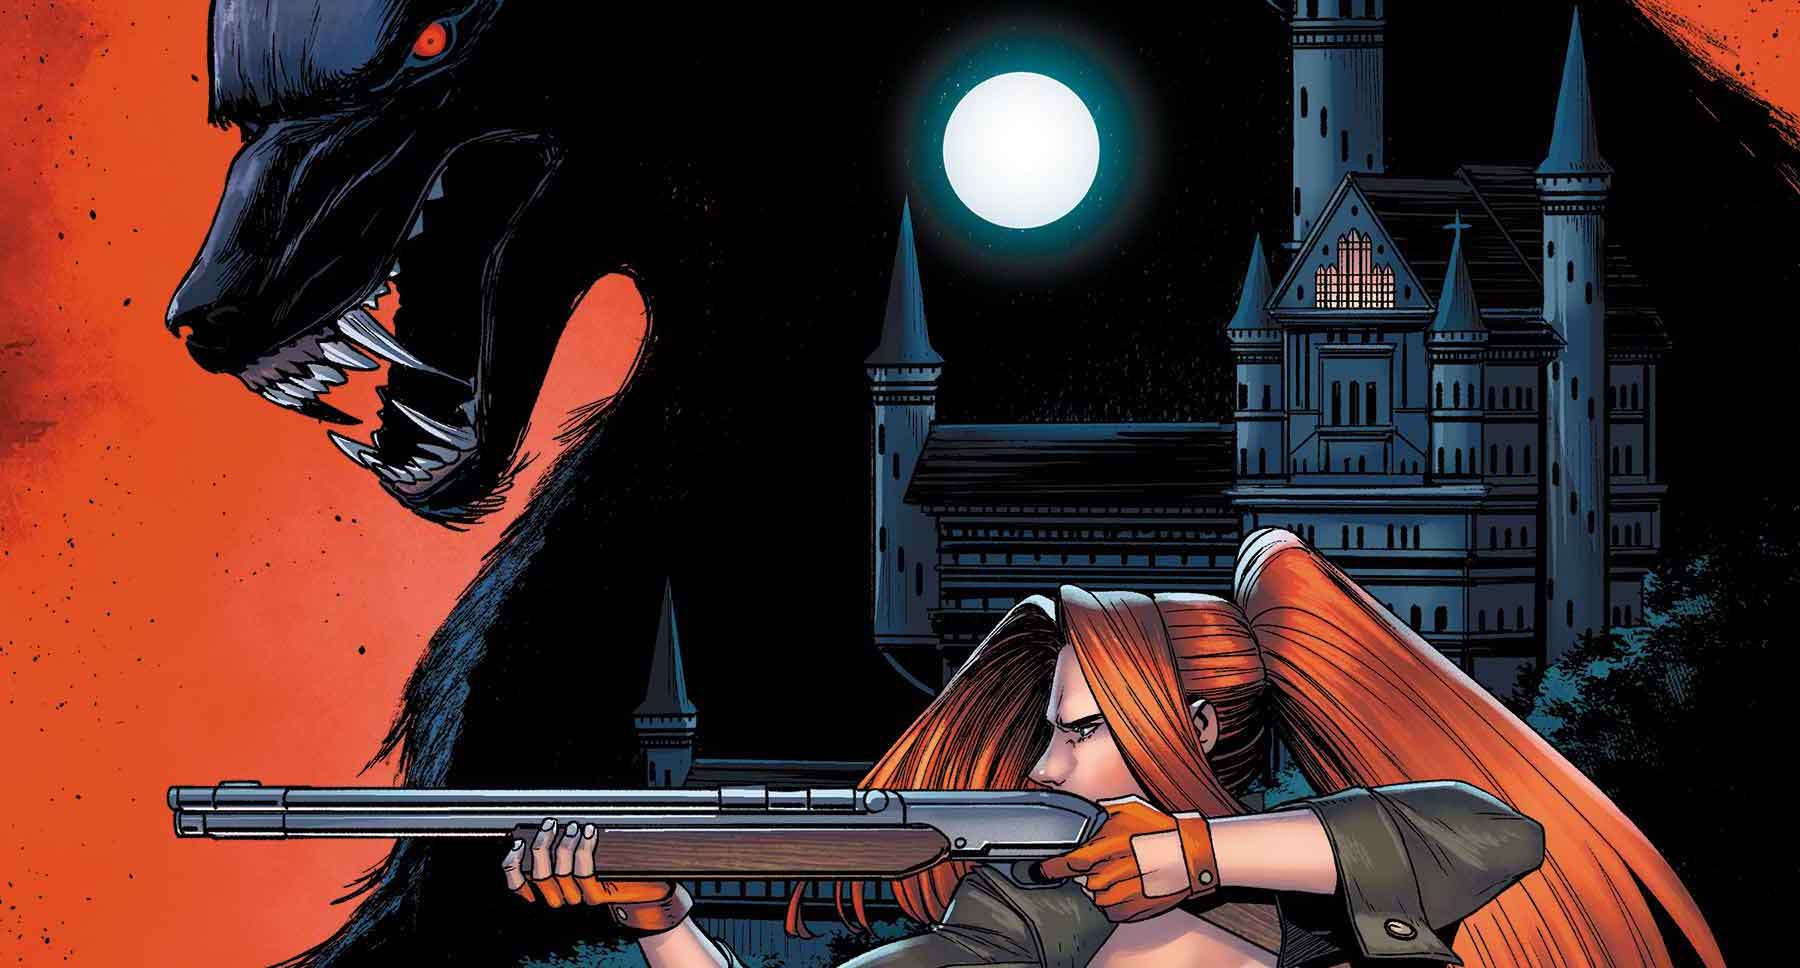 'Werewolf by Night' #1 returns with oversized one-shot